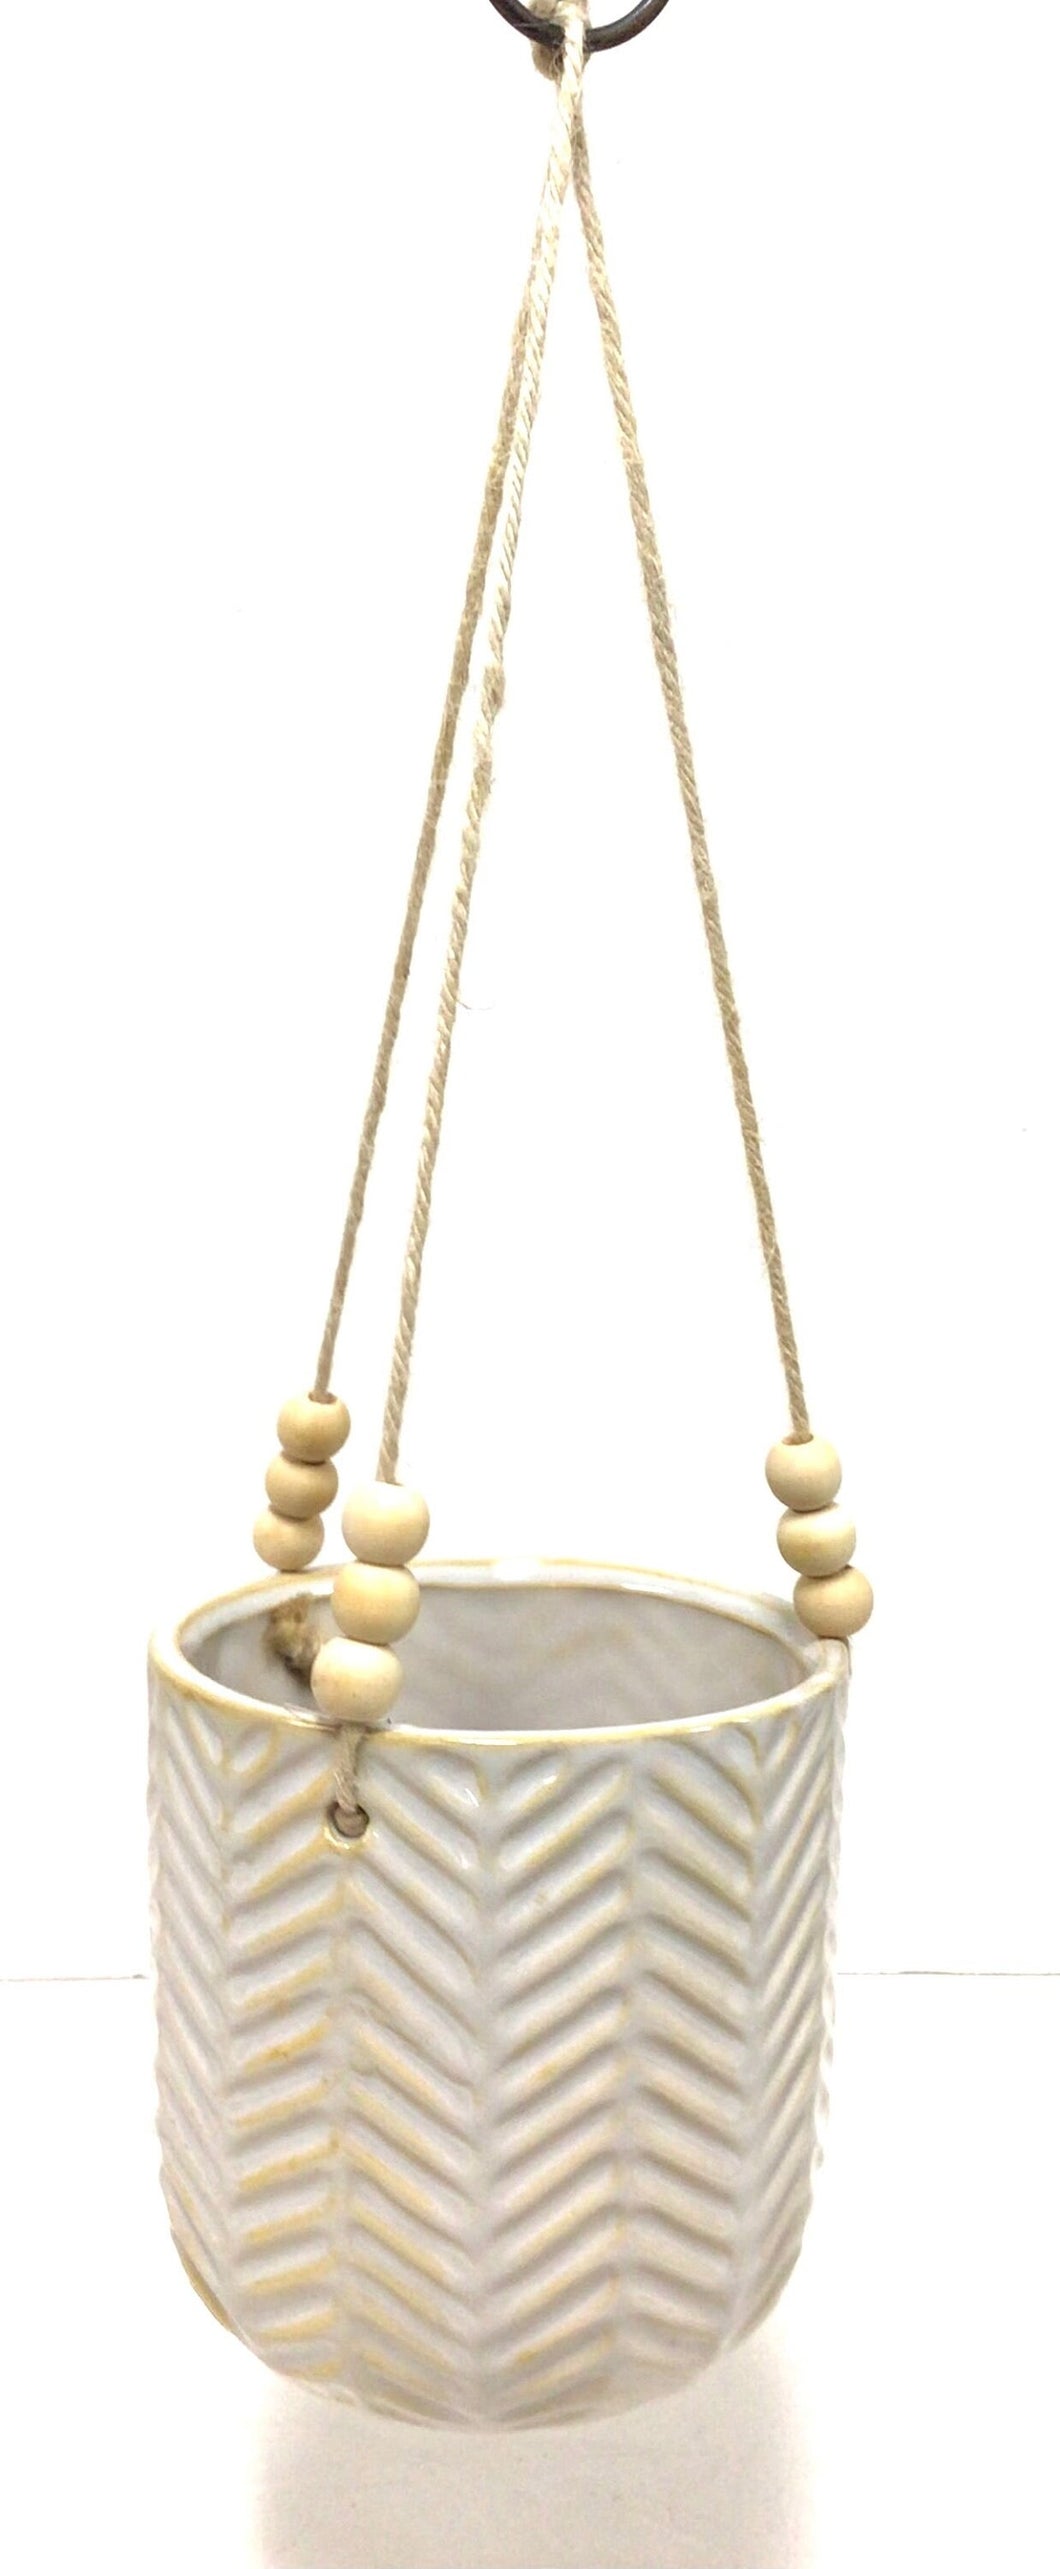 Hanging Ceramic Planters small white flower pot for succulents